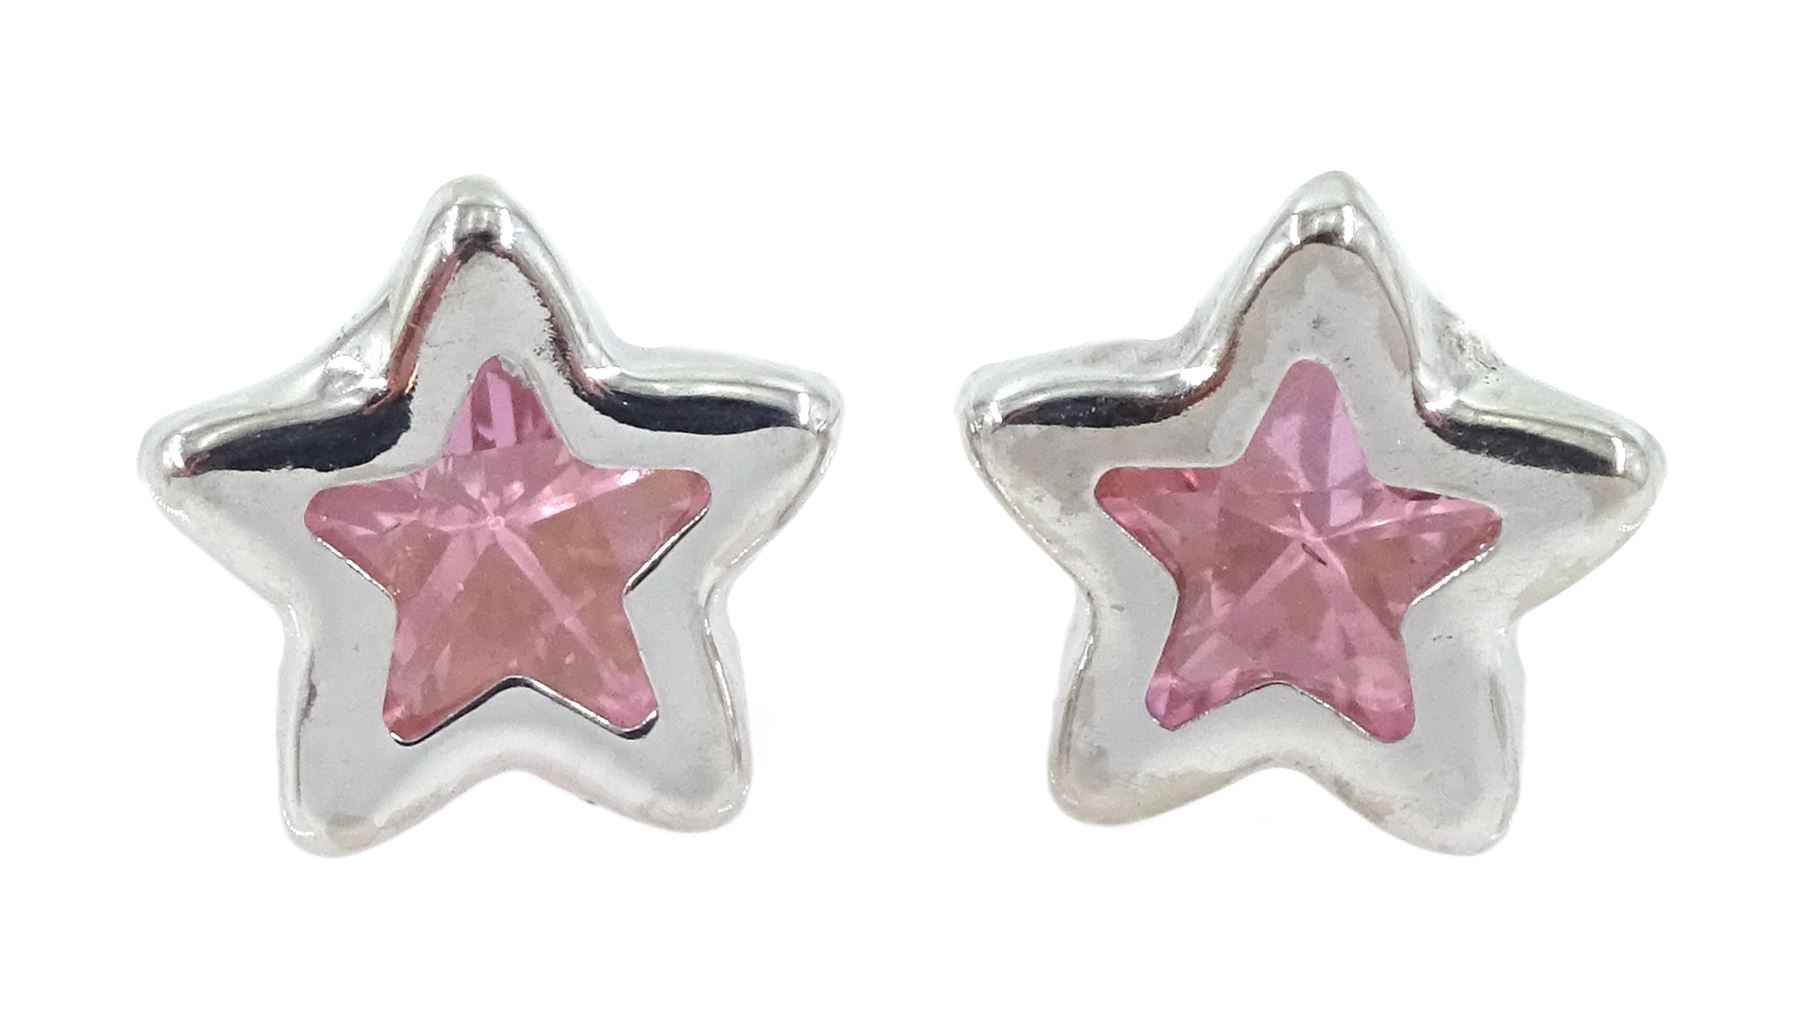 Pair of 9ct white gold purple stone star stud earrings - Image 2 of 3